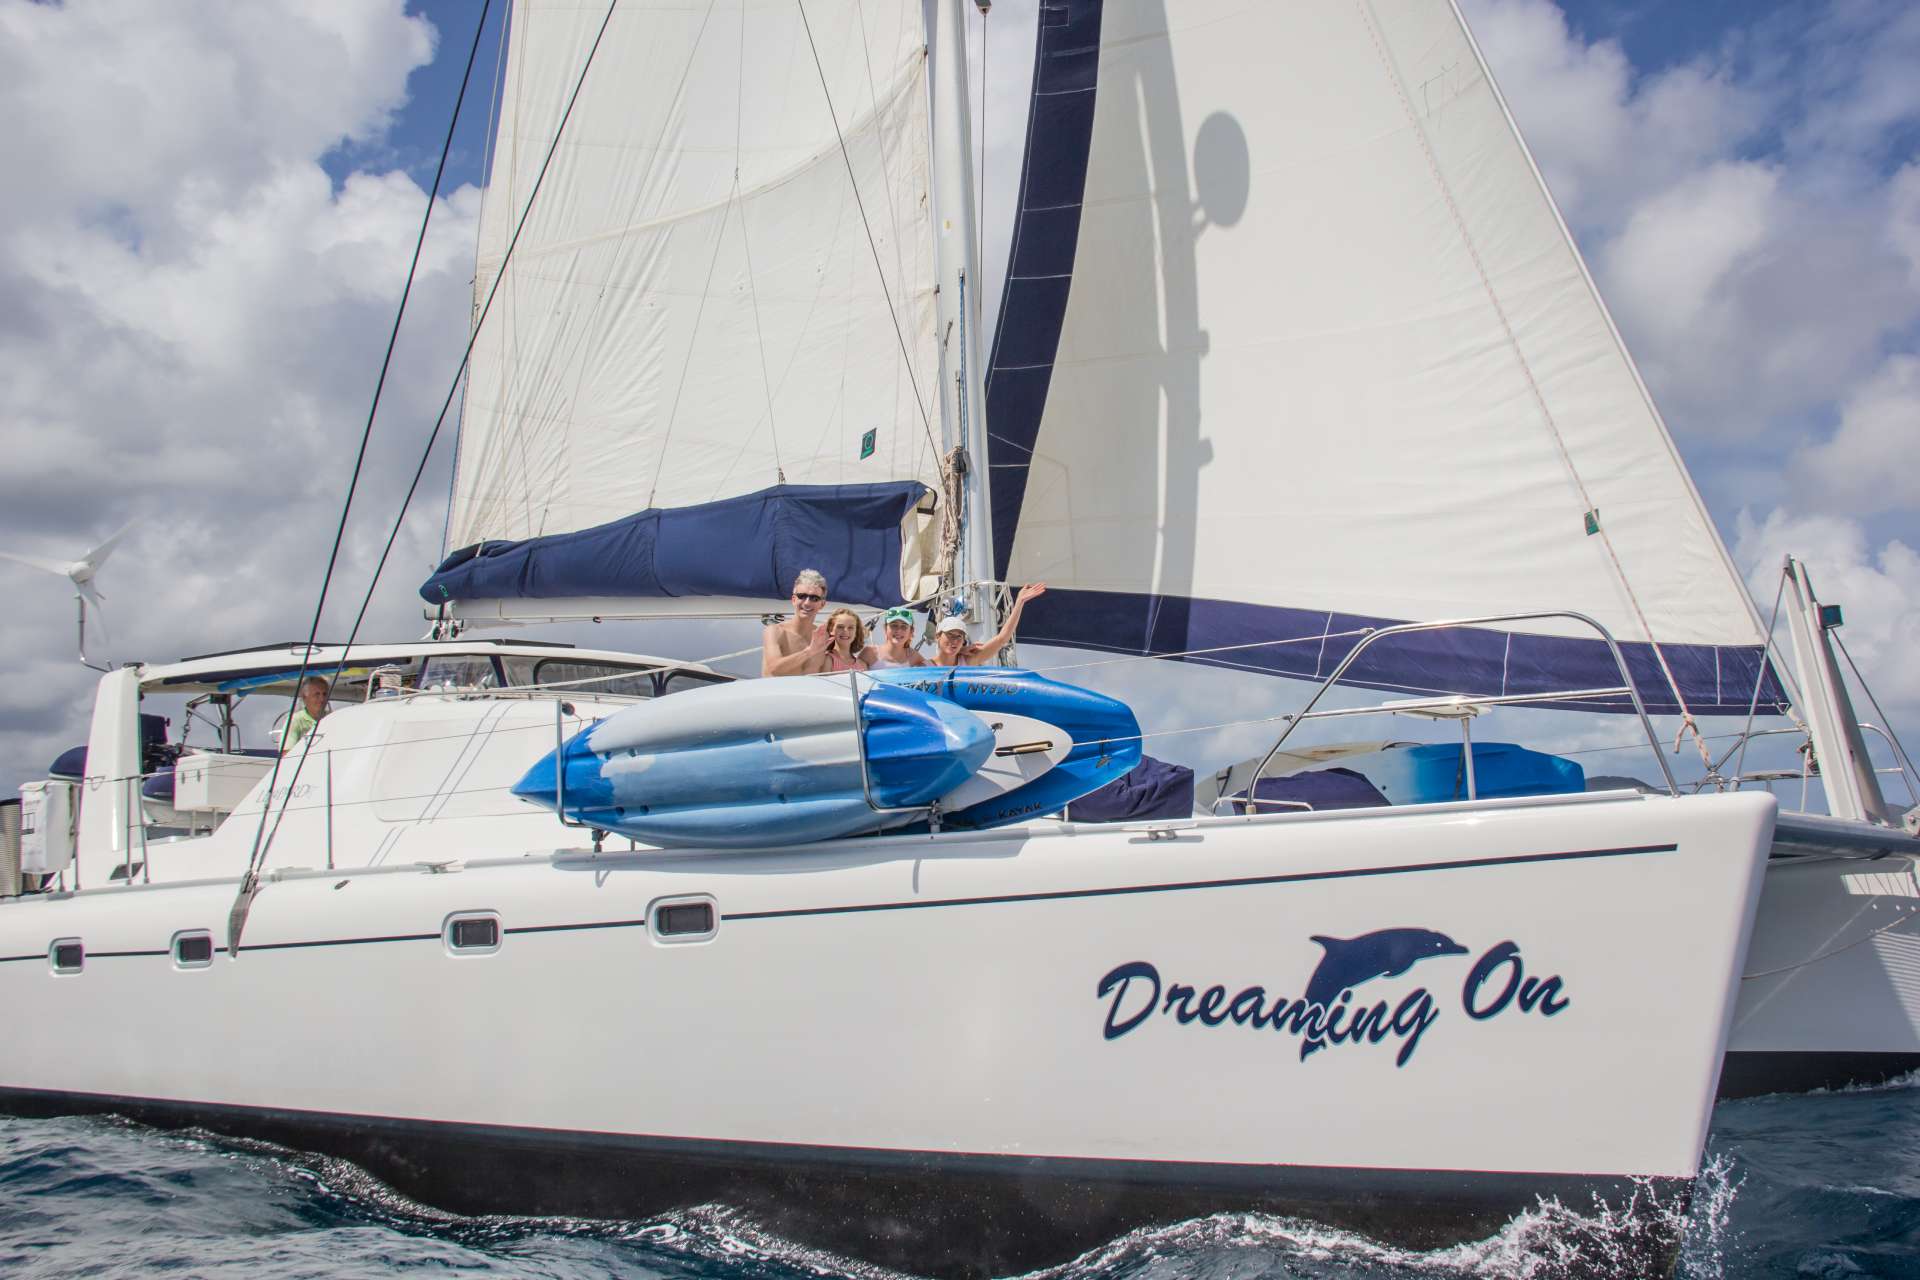 dreaming on - Yacht Charter St Katherine's Docks & Boat hire in Central america, Belize 2